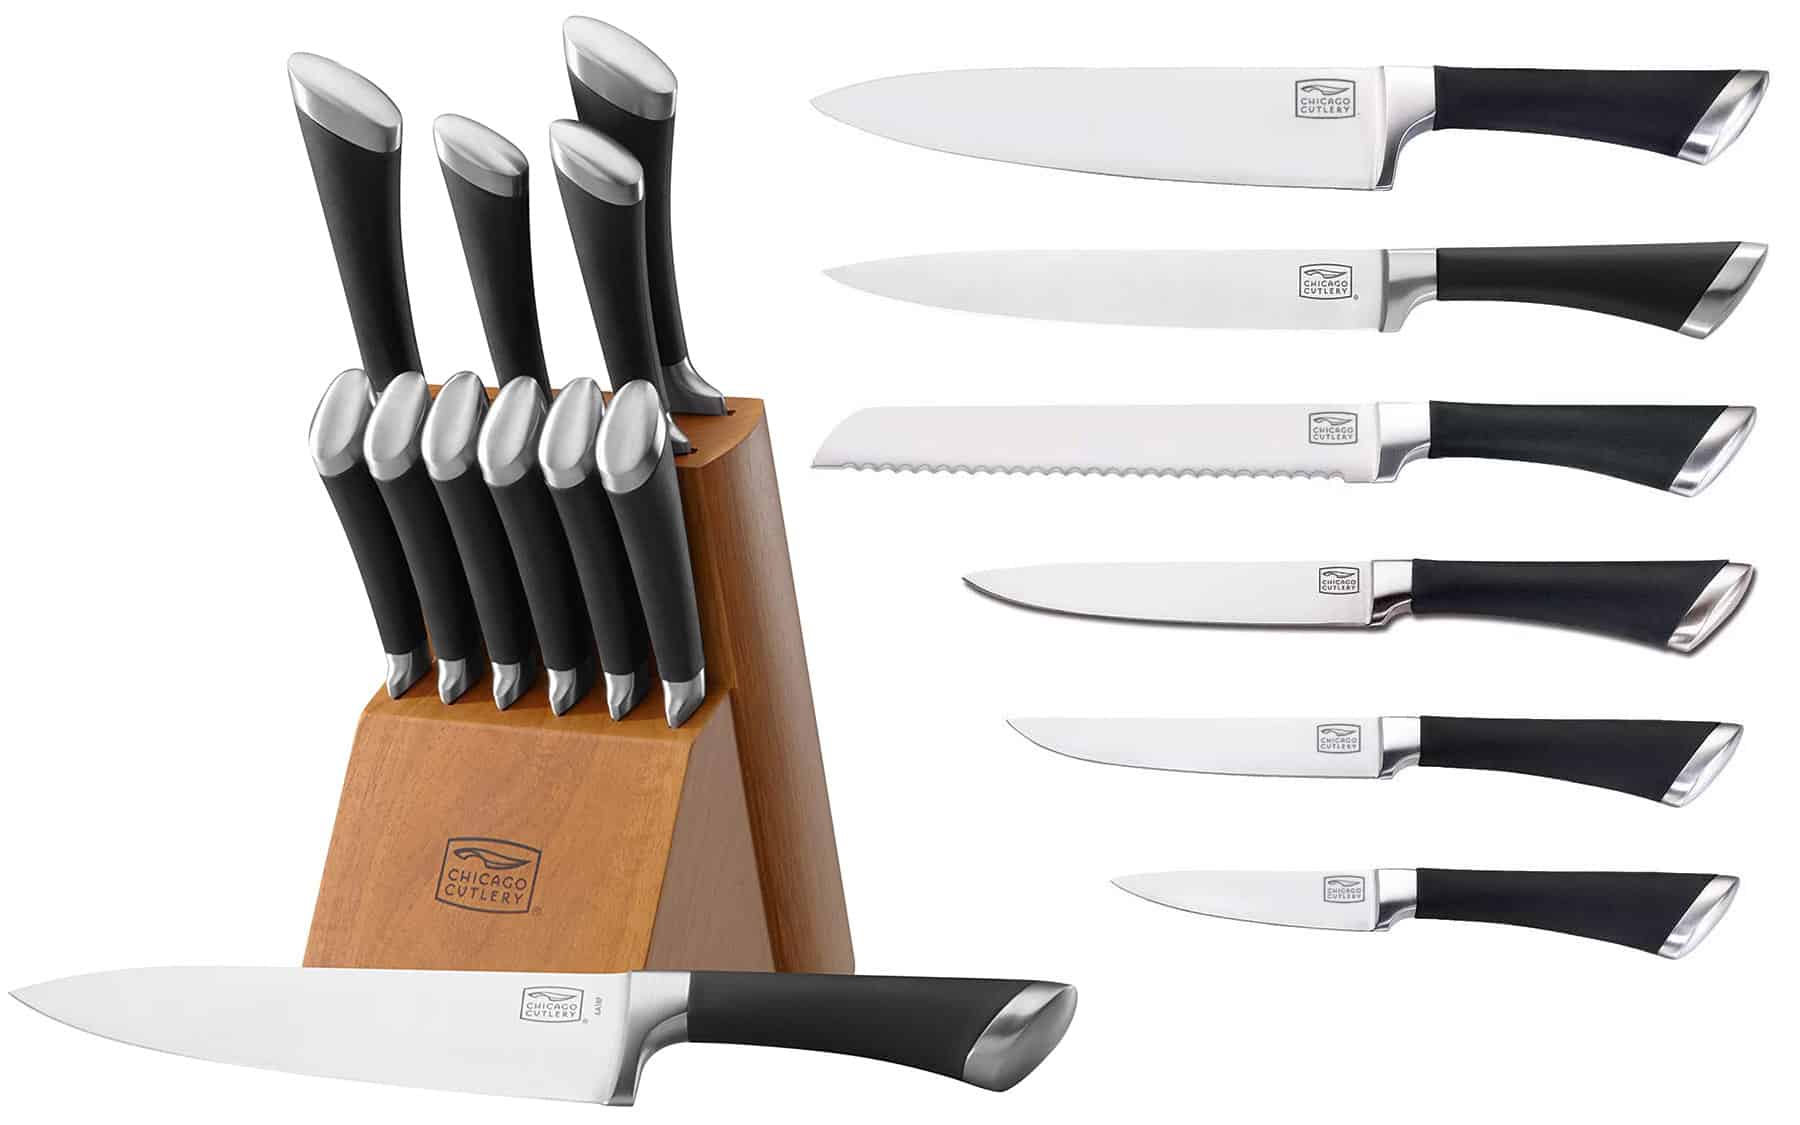 The Fusion series from Chicago Cutlery offers ecellent value at the under $100 price point. 